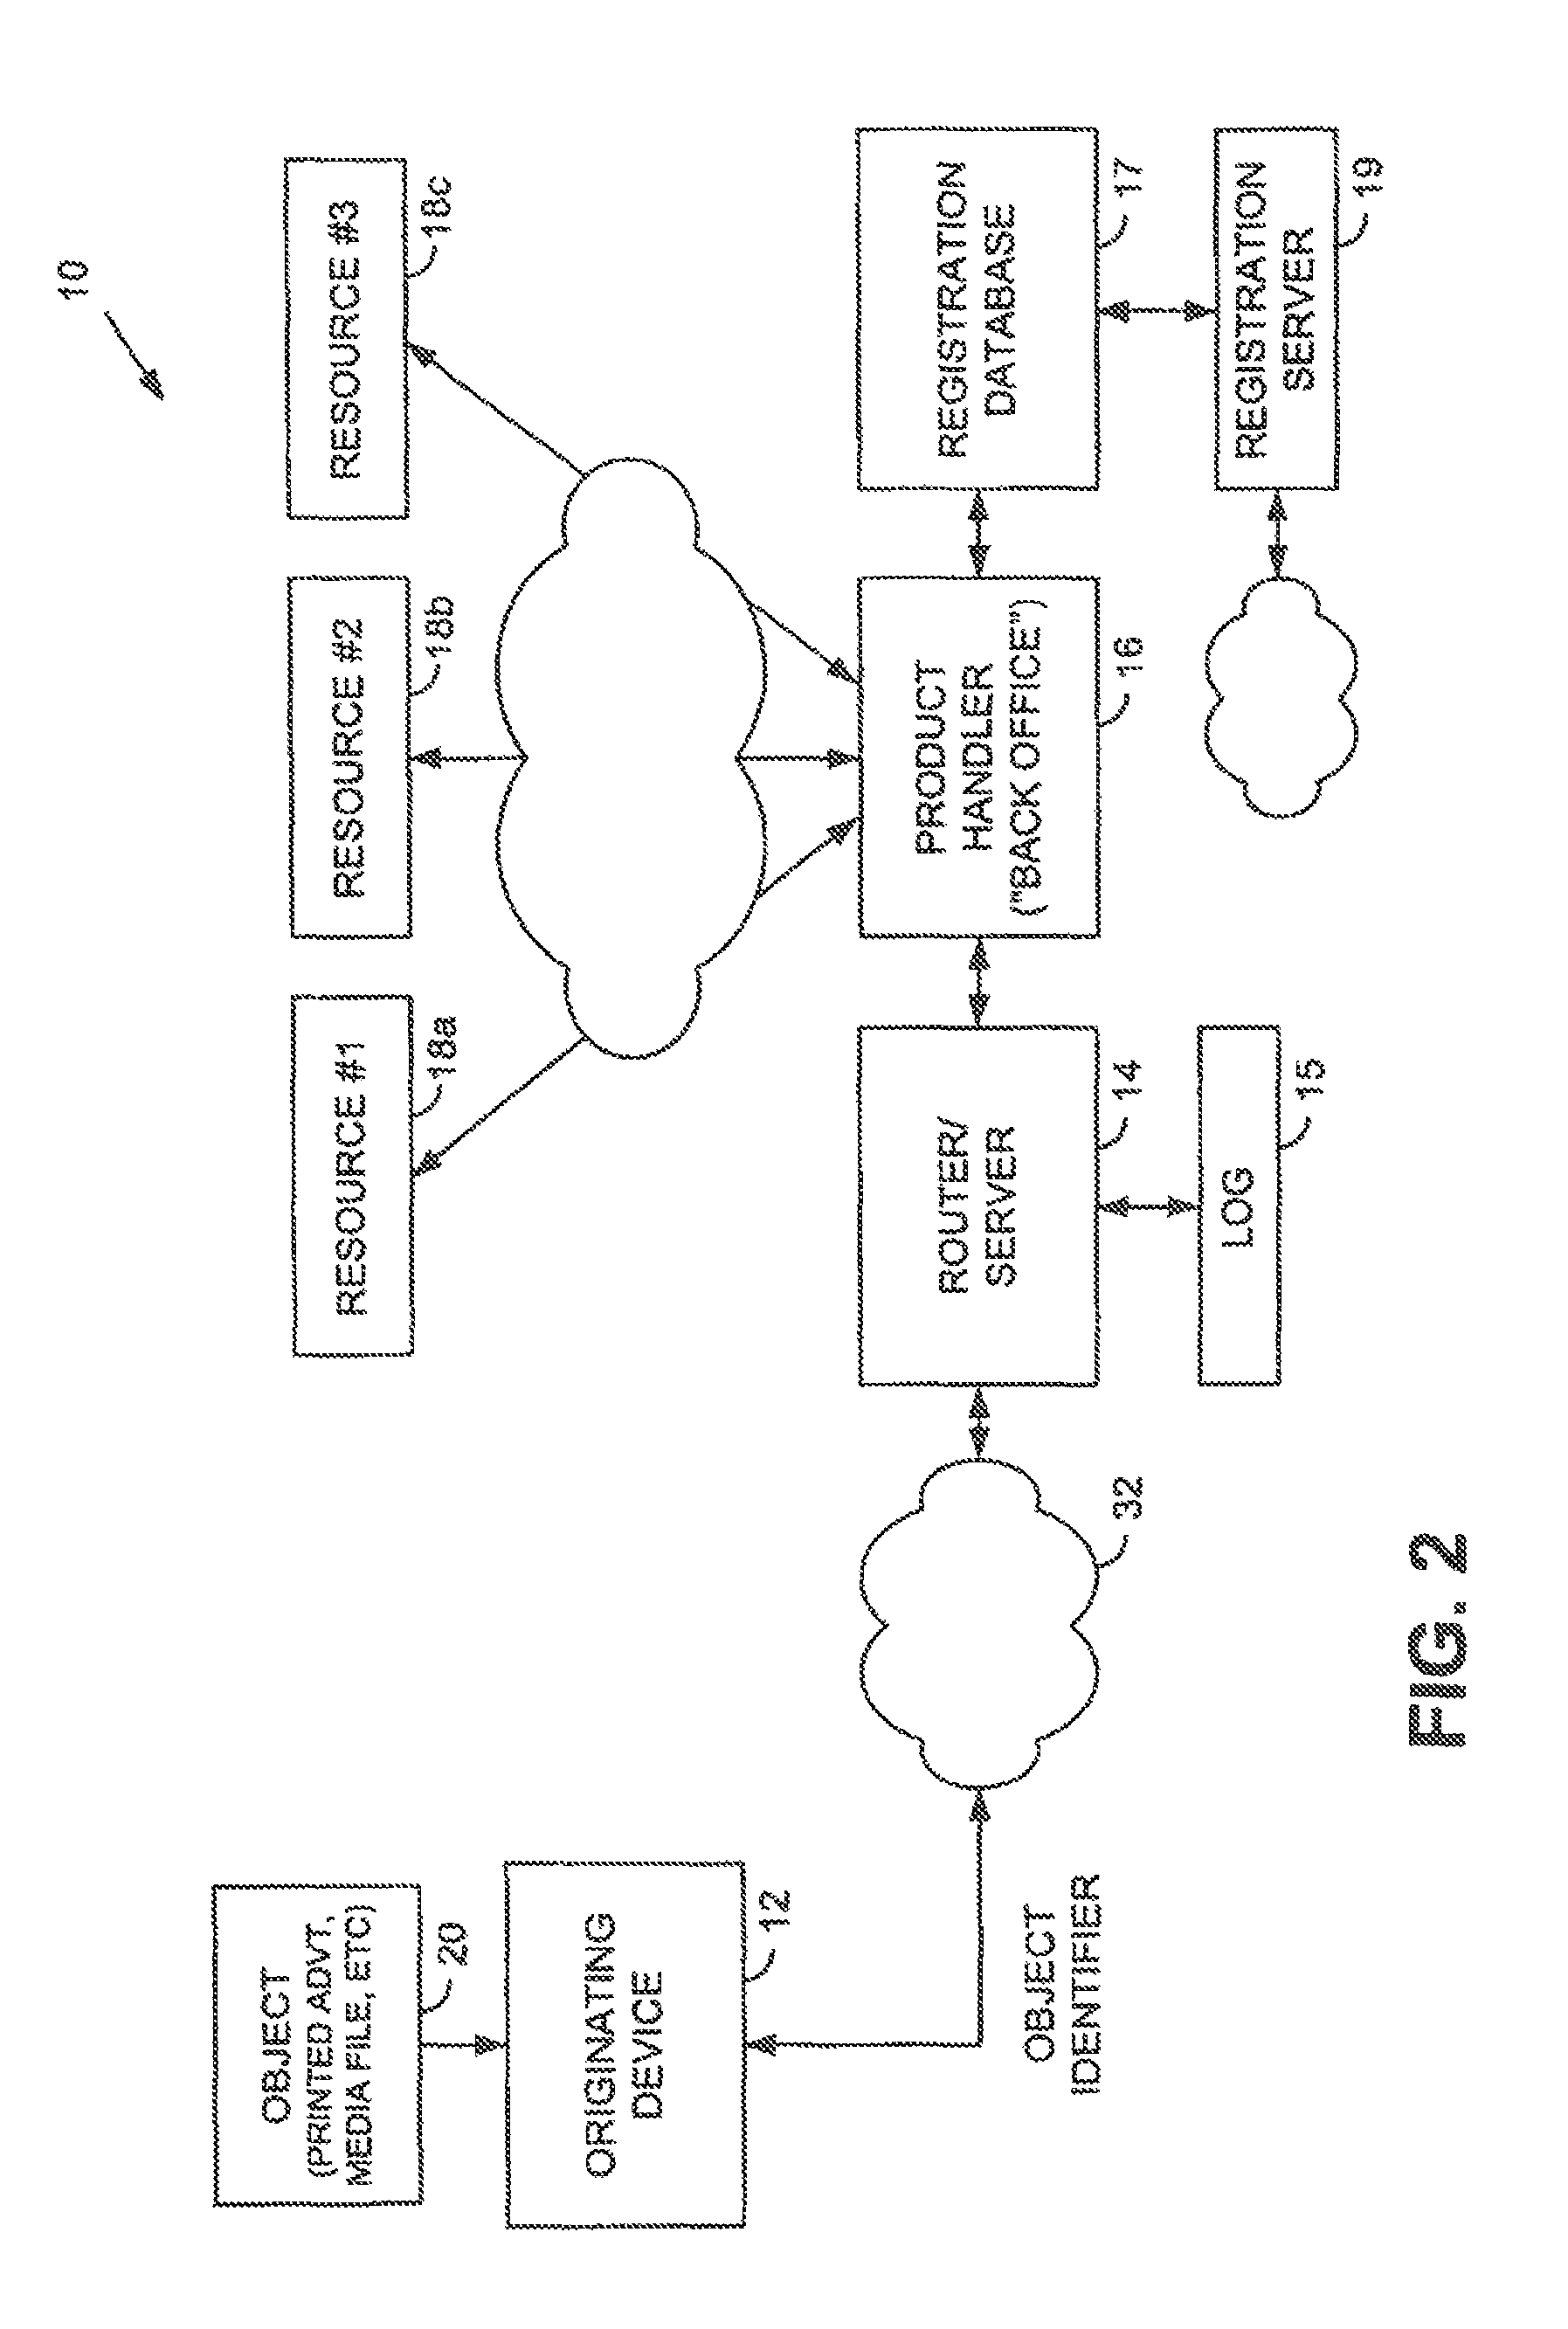 Location-based arrangements employing mobile devices